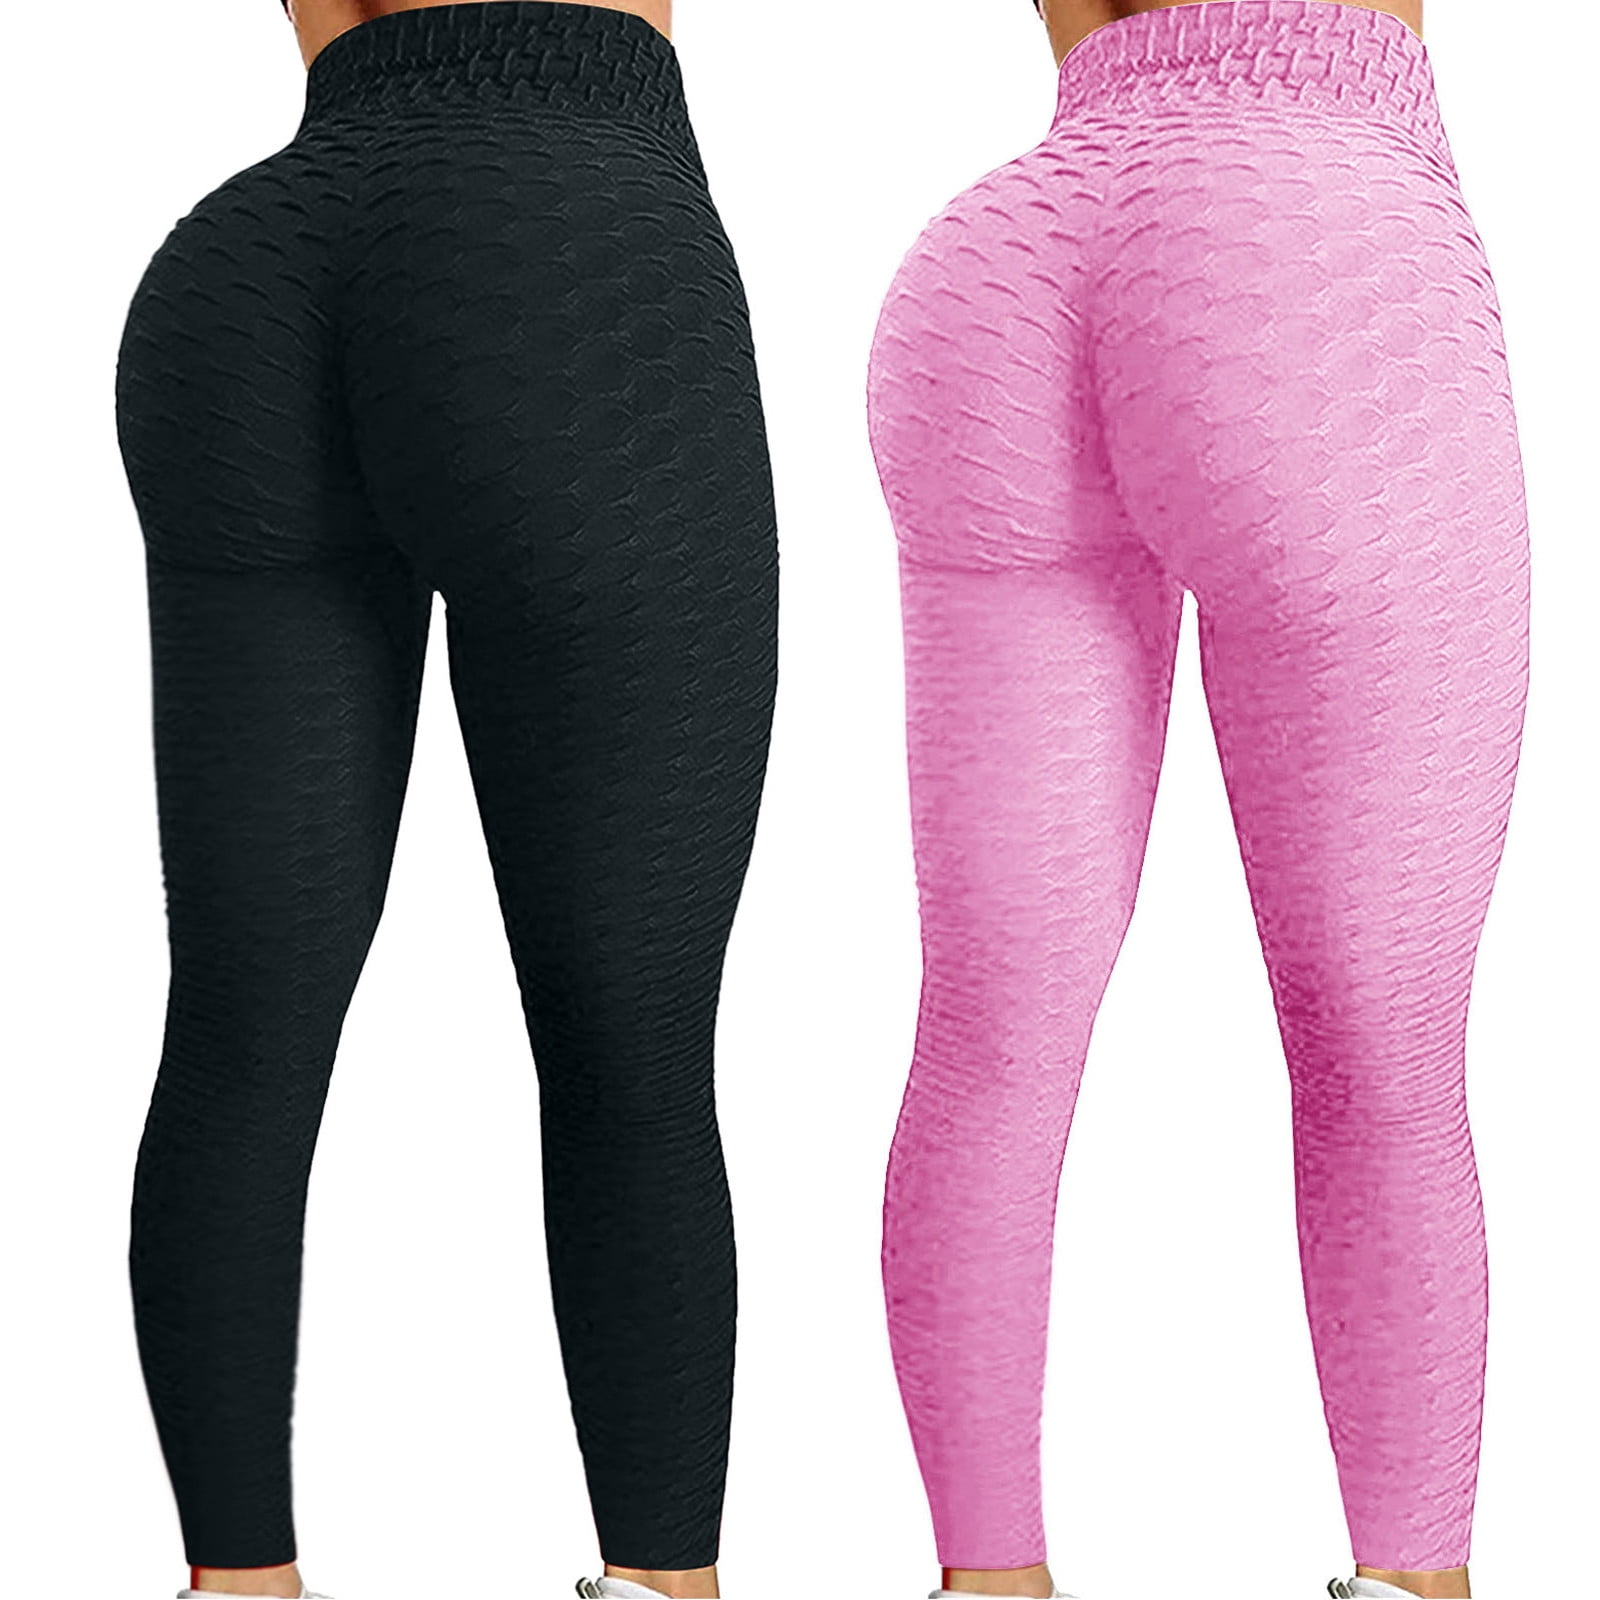 YUNAFFT Yoga Pants for Women Clearance Plus Size Women's Bubble Hip Lifting  Exercise Fitness Running High Waist Yoga Pants 